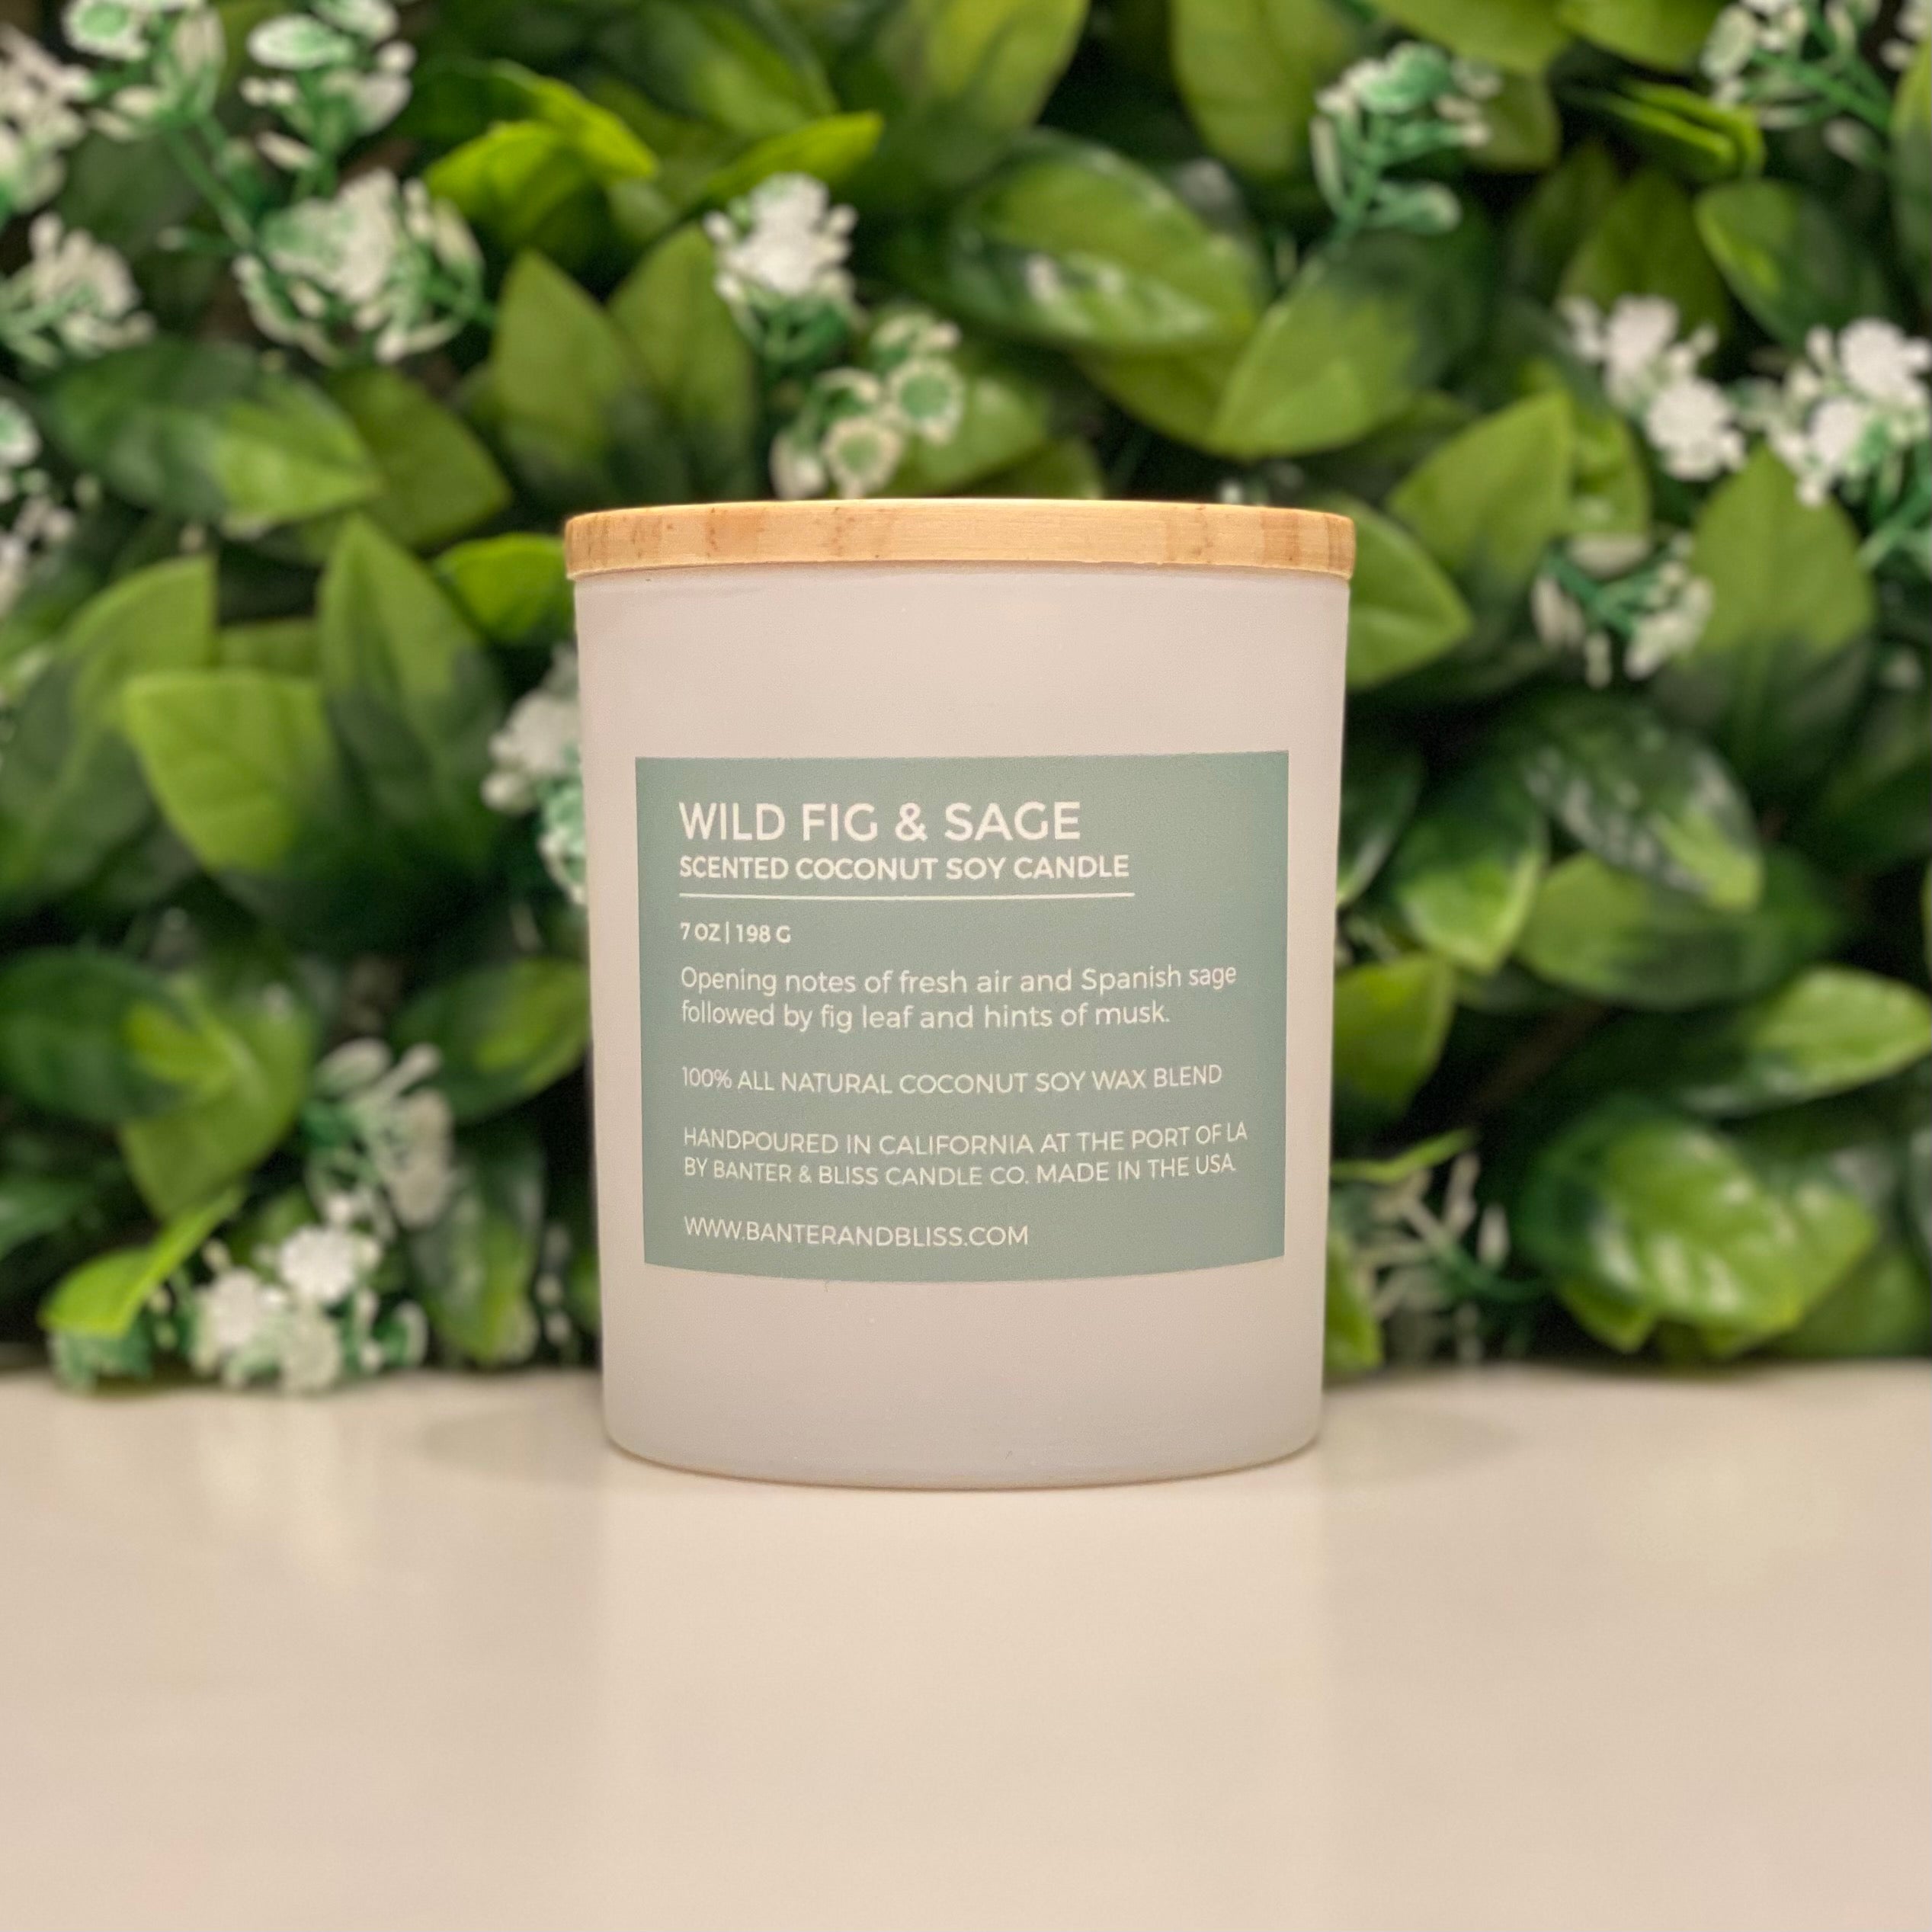 Wild Fig & Sage. 7 oz. Scented Coconut Soy Candle.